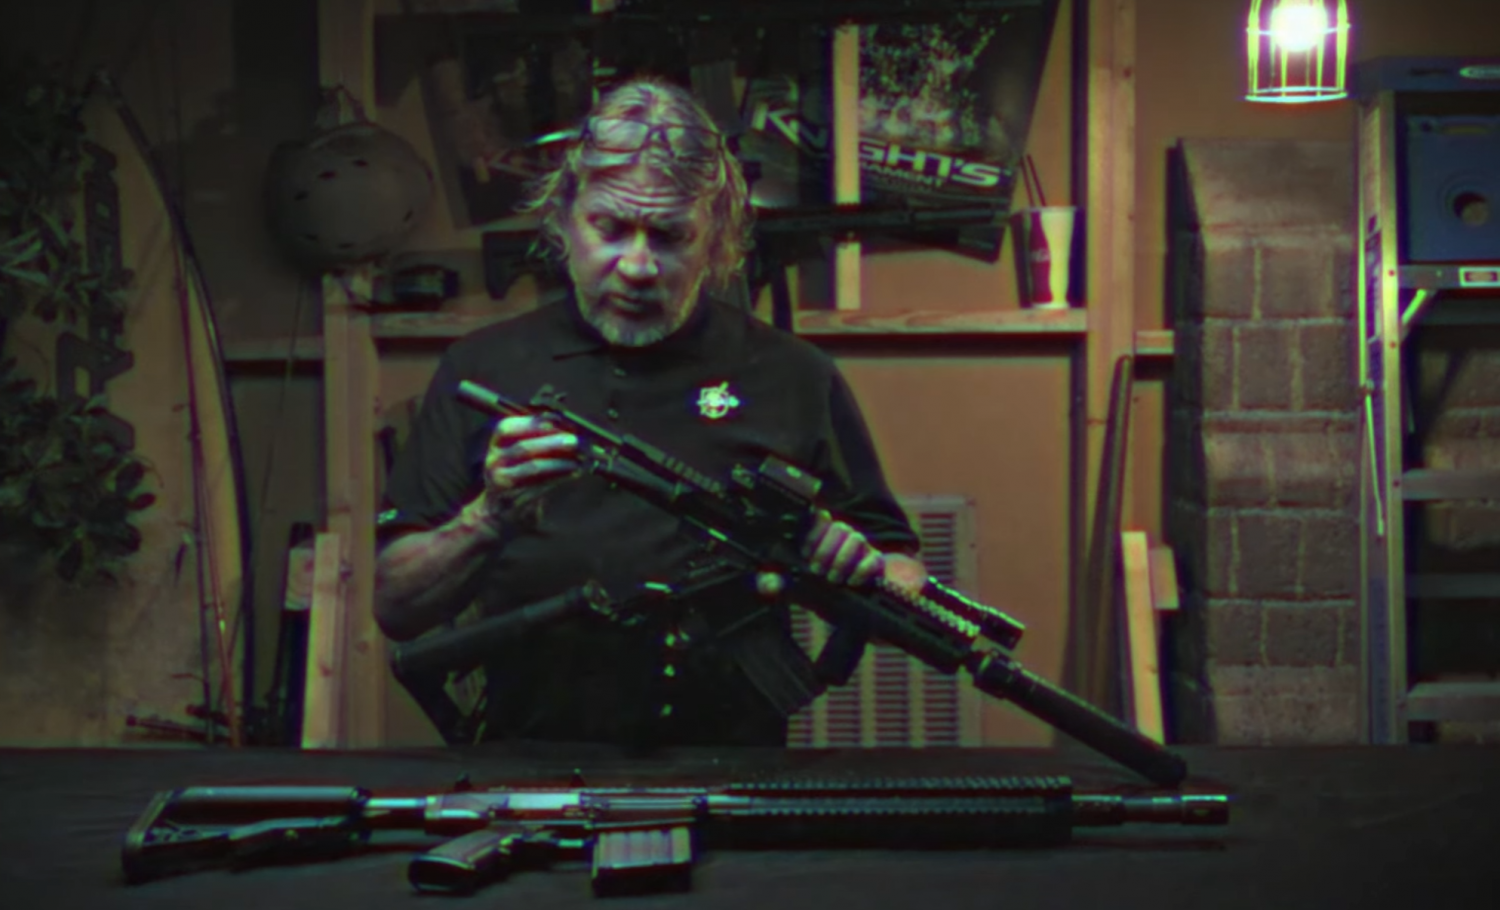 Knights Armament Teases New Variant of SR15 Rifle